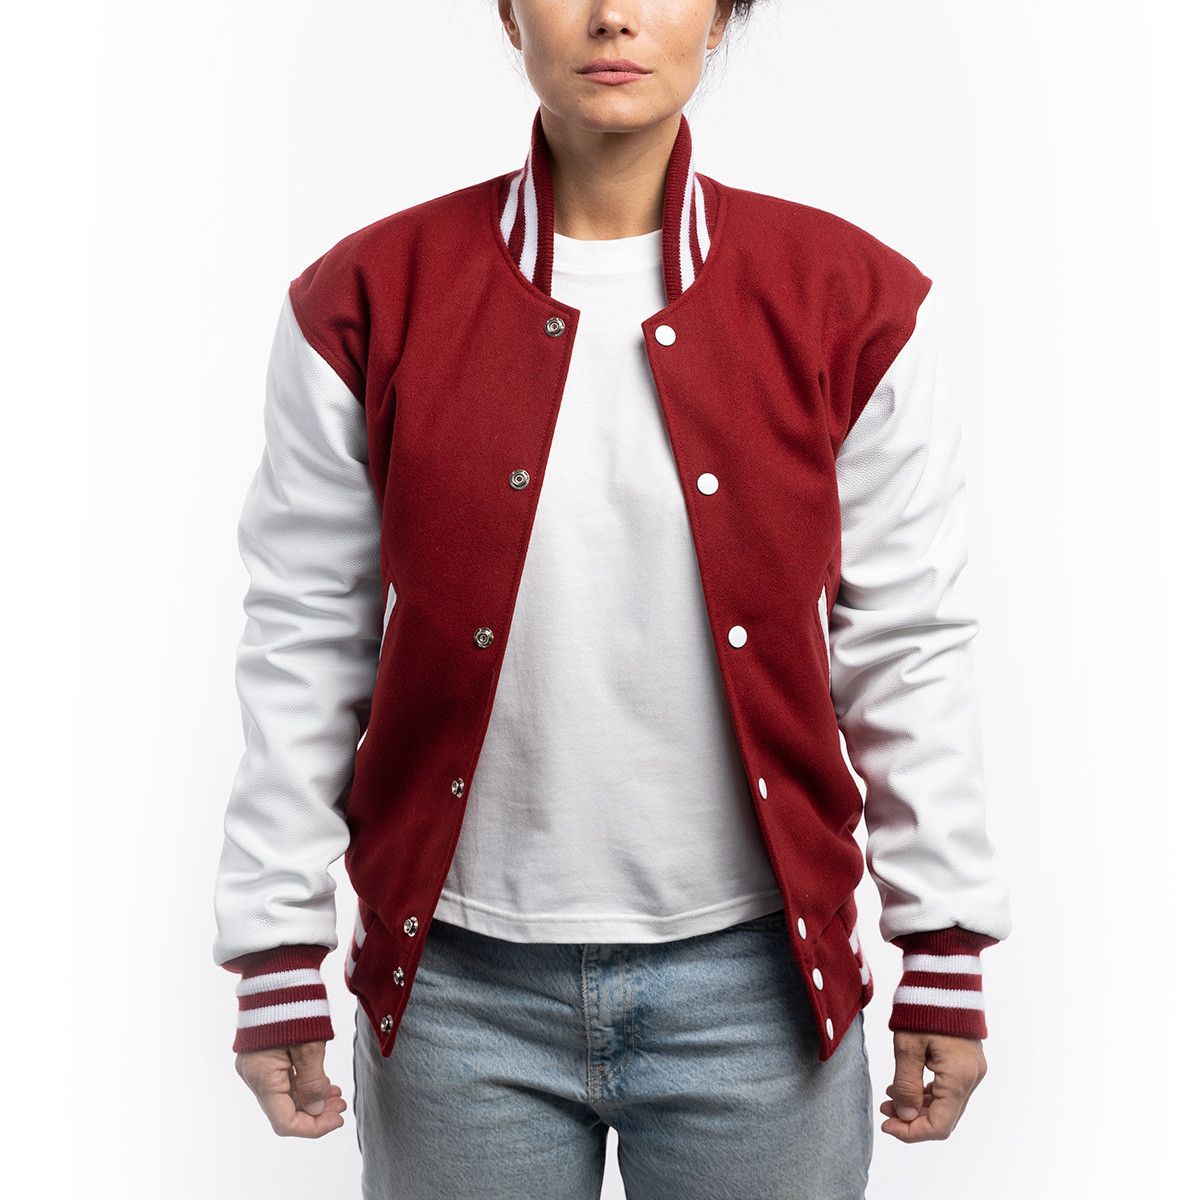 Women's Red Letterman Jacket with White Sleeves